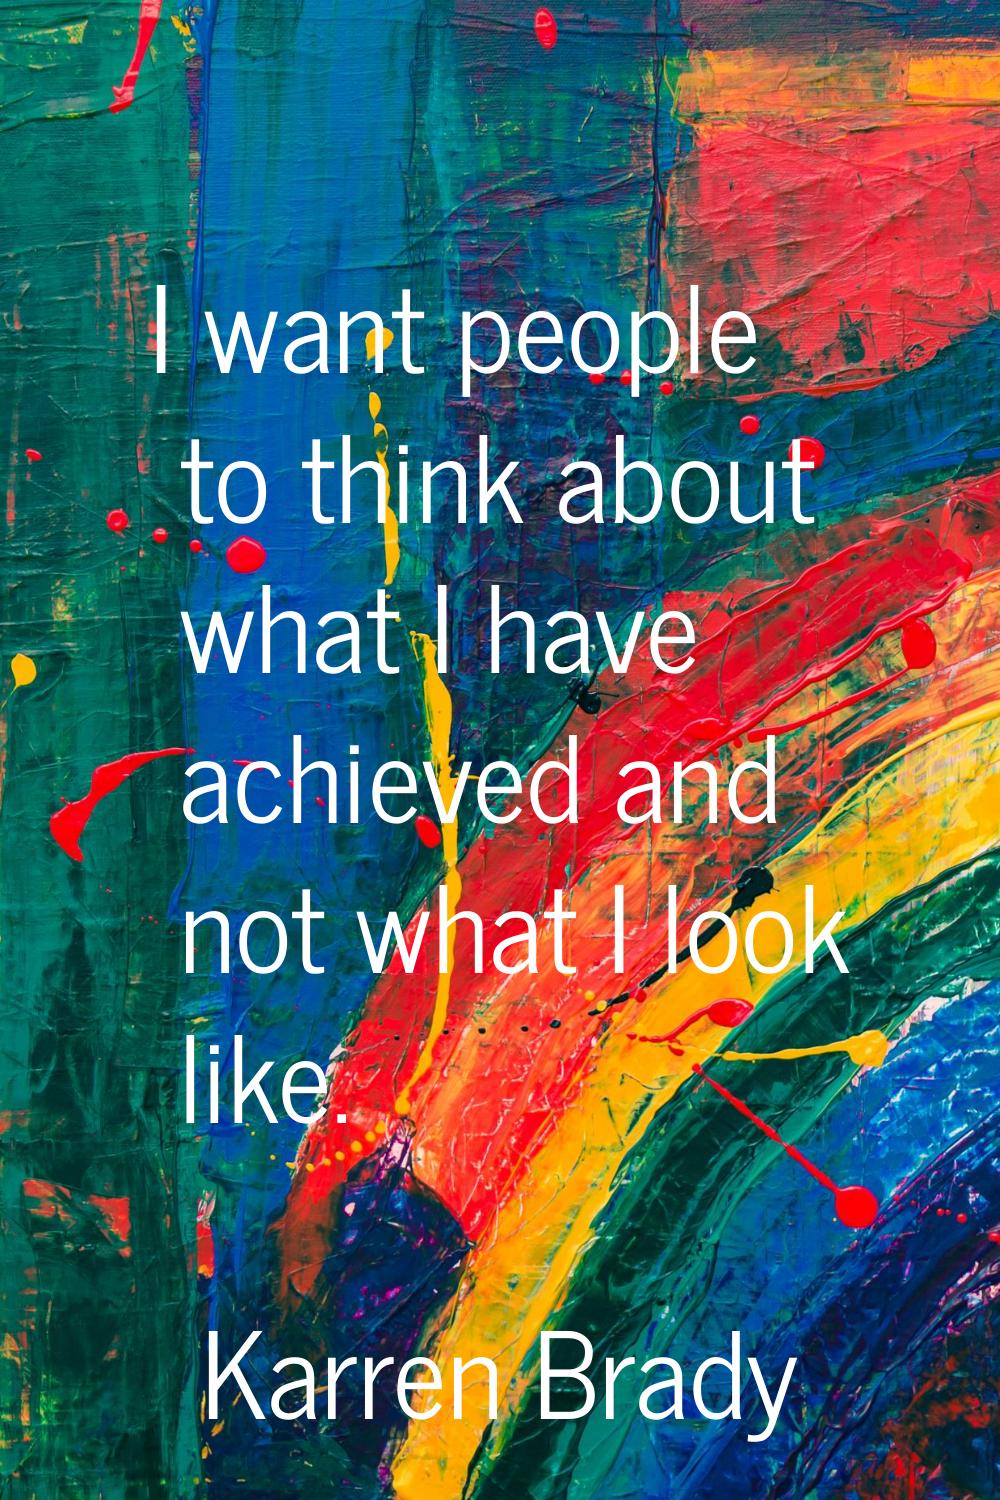 I want people to think about what I have achieved and not what I look like.